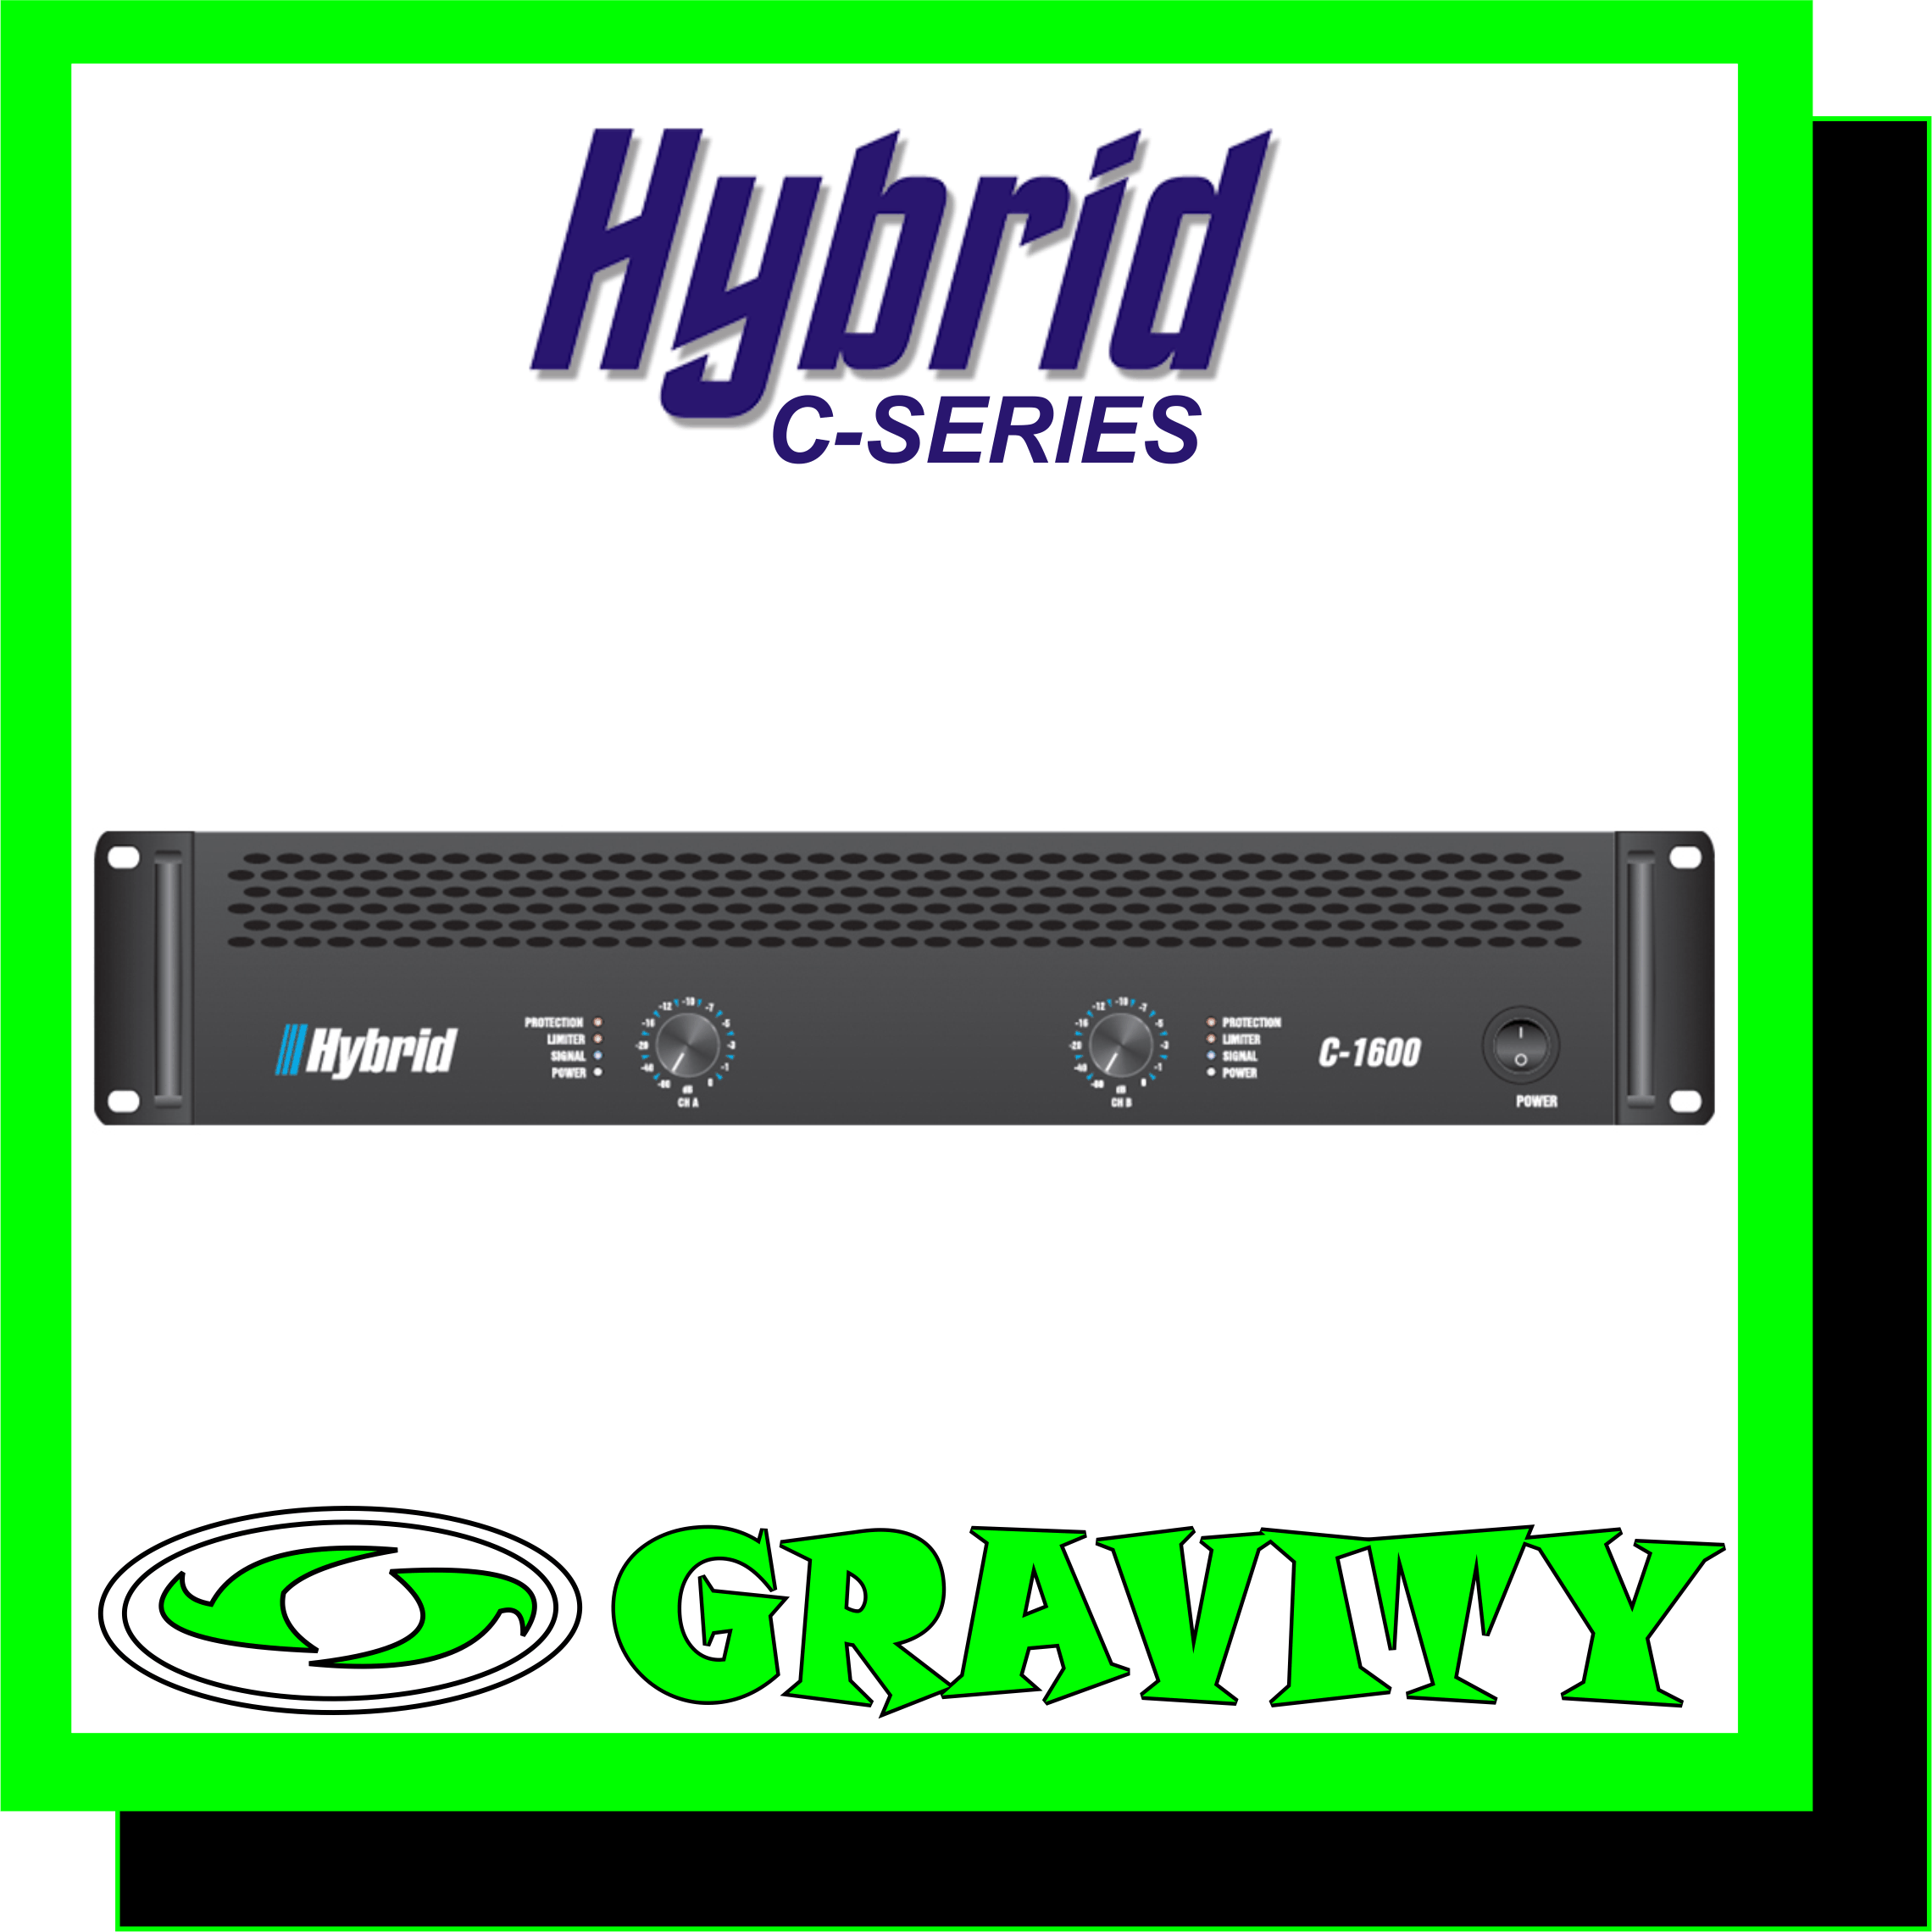 Hybrid C1600MK2 2v800W Power Amplifier with X-over  8Ohm Stereo Power . RMS/CH 485W 4Ohm Stereo Power . RMS/CH 715W 8Ohm Bridged Mono Power . RMS 1430W  Frequency Response ( 1W/8O) 20Hz 20KHz +/- 3dB Protection DC Protection . Short Circuit Protection . Thermal Protection . Inrush Current Protection . Soft Start Portection . Input & Overload Protection THD+N (20Hz-20KHz) <0.1% Damping Factor (1KHz @ 8O) >300 Hum & Noise(A weighted . -80dBW) 95dB Input Impedance (Balanced / Unbalanced) 20K Ohm / 10K Ohm Crosstalk (20Hz-20KHz Rated Power 8O) >60dB Cooling 2 x Fans . Dual speed . Front to Rear Airflow  Input Connectors Jack/Female XLR Neutrik Combo + Male XLR Neutrik Output Connectors 3x Neutrik Speakon Dimensions (WxHxD) mm 483 x 88 x 430 Weight Kg 18.5